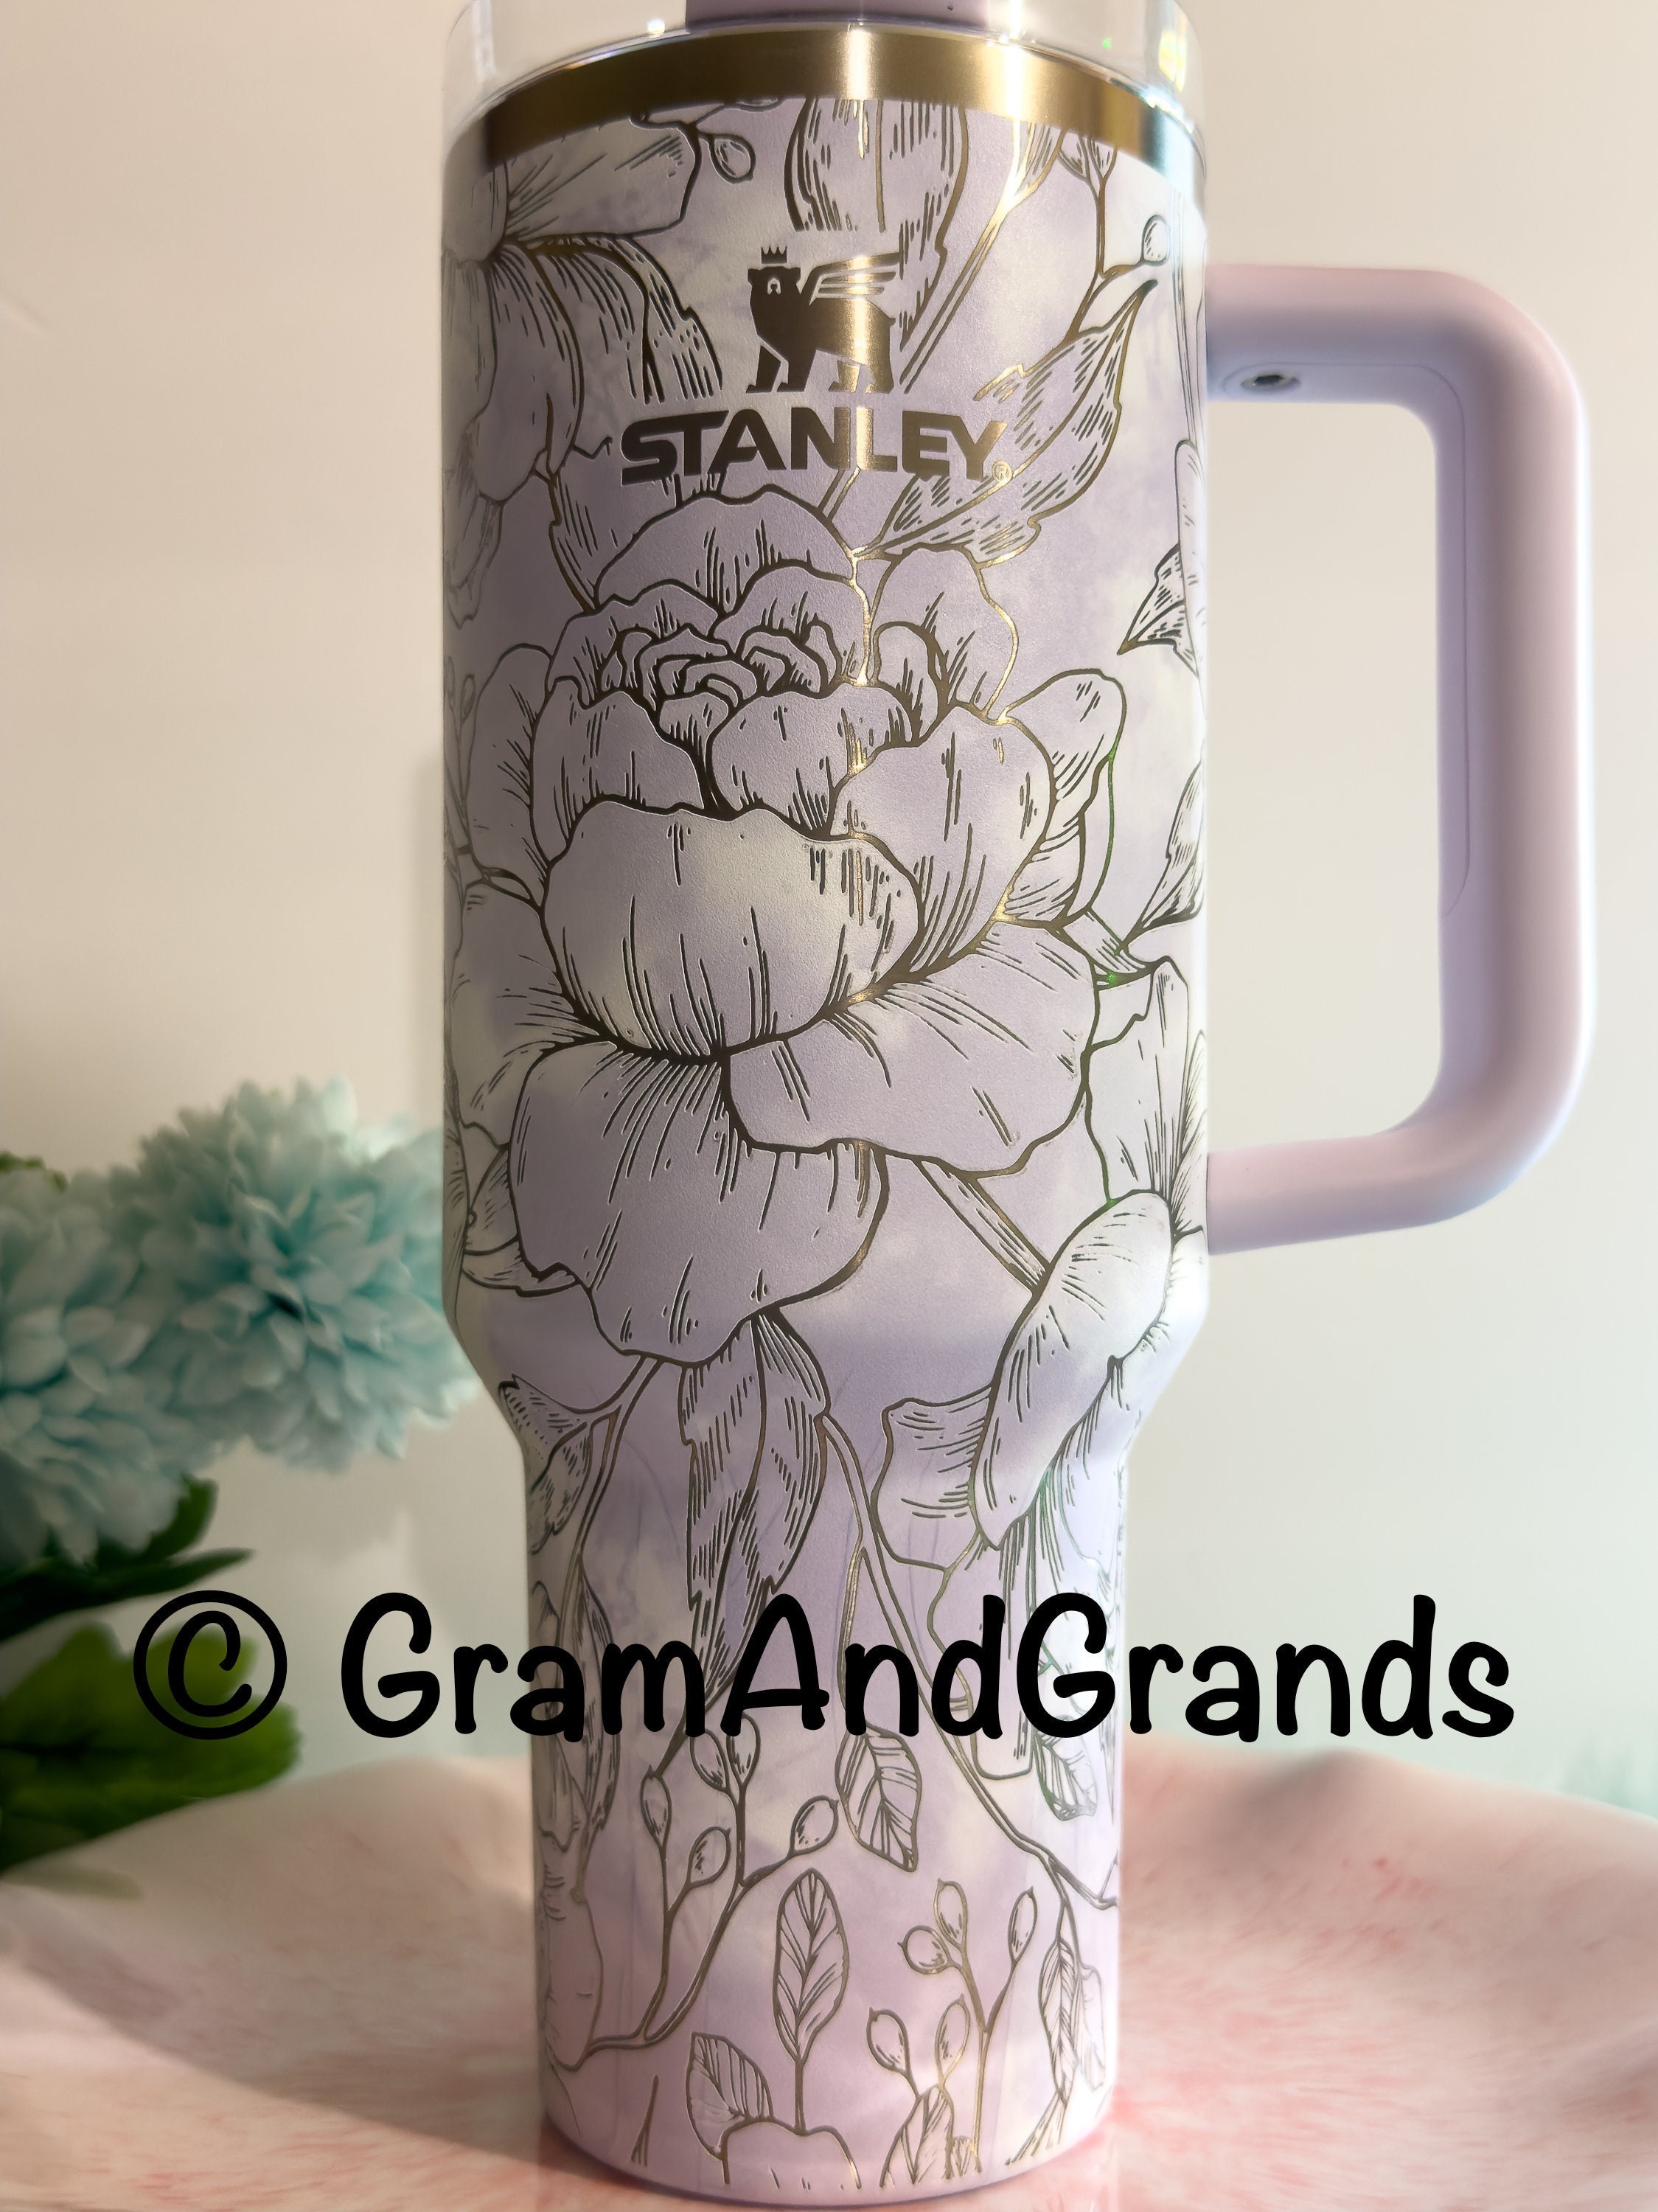 MAMA Flower Engraved Wrap Stanley-style 40 Ounce Cup With Handle 